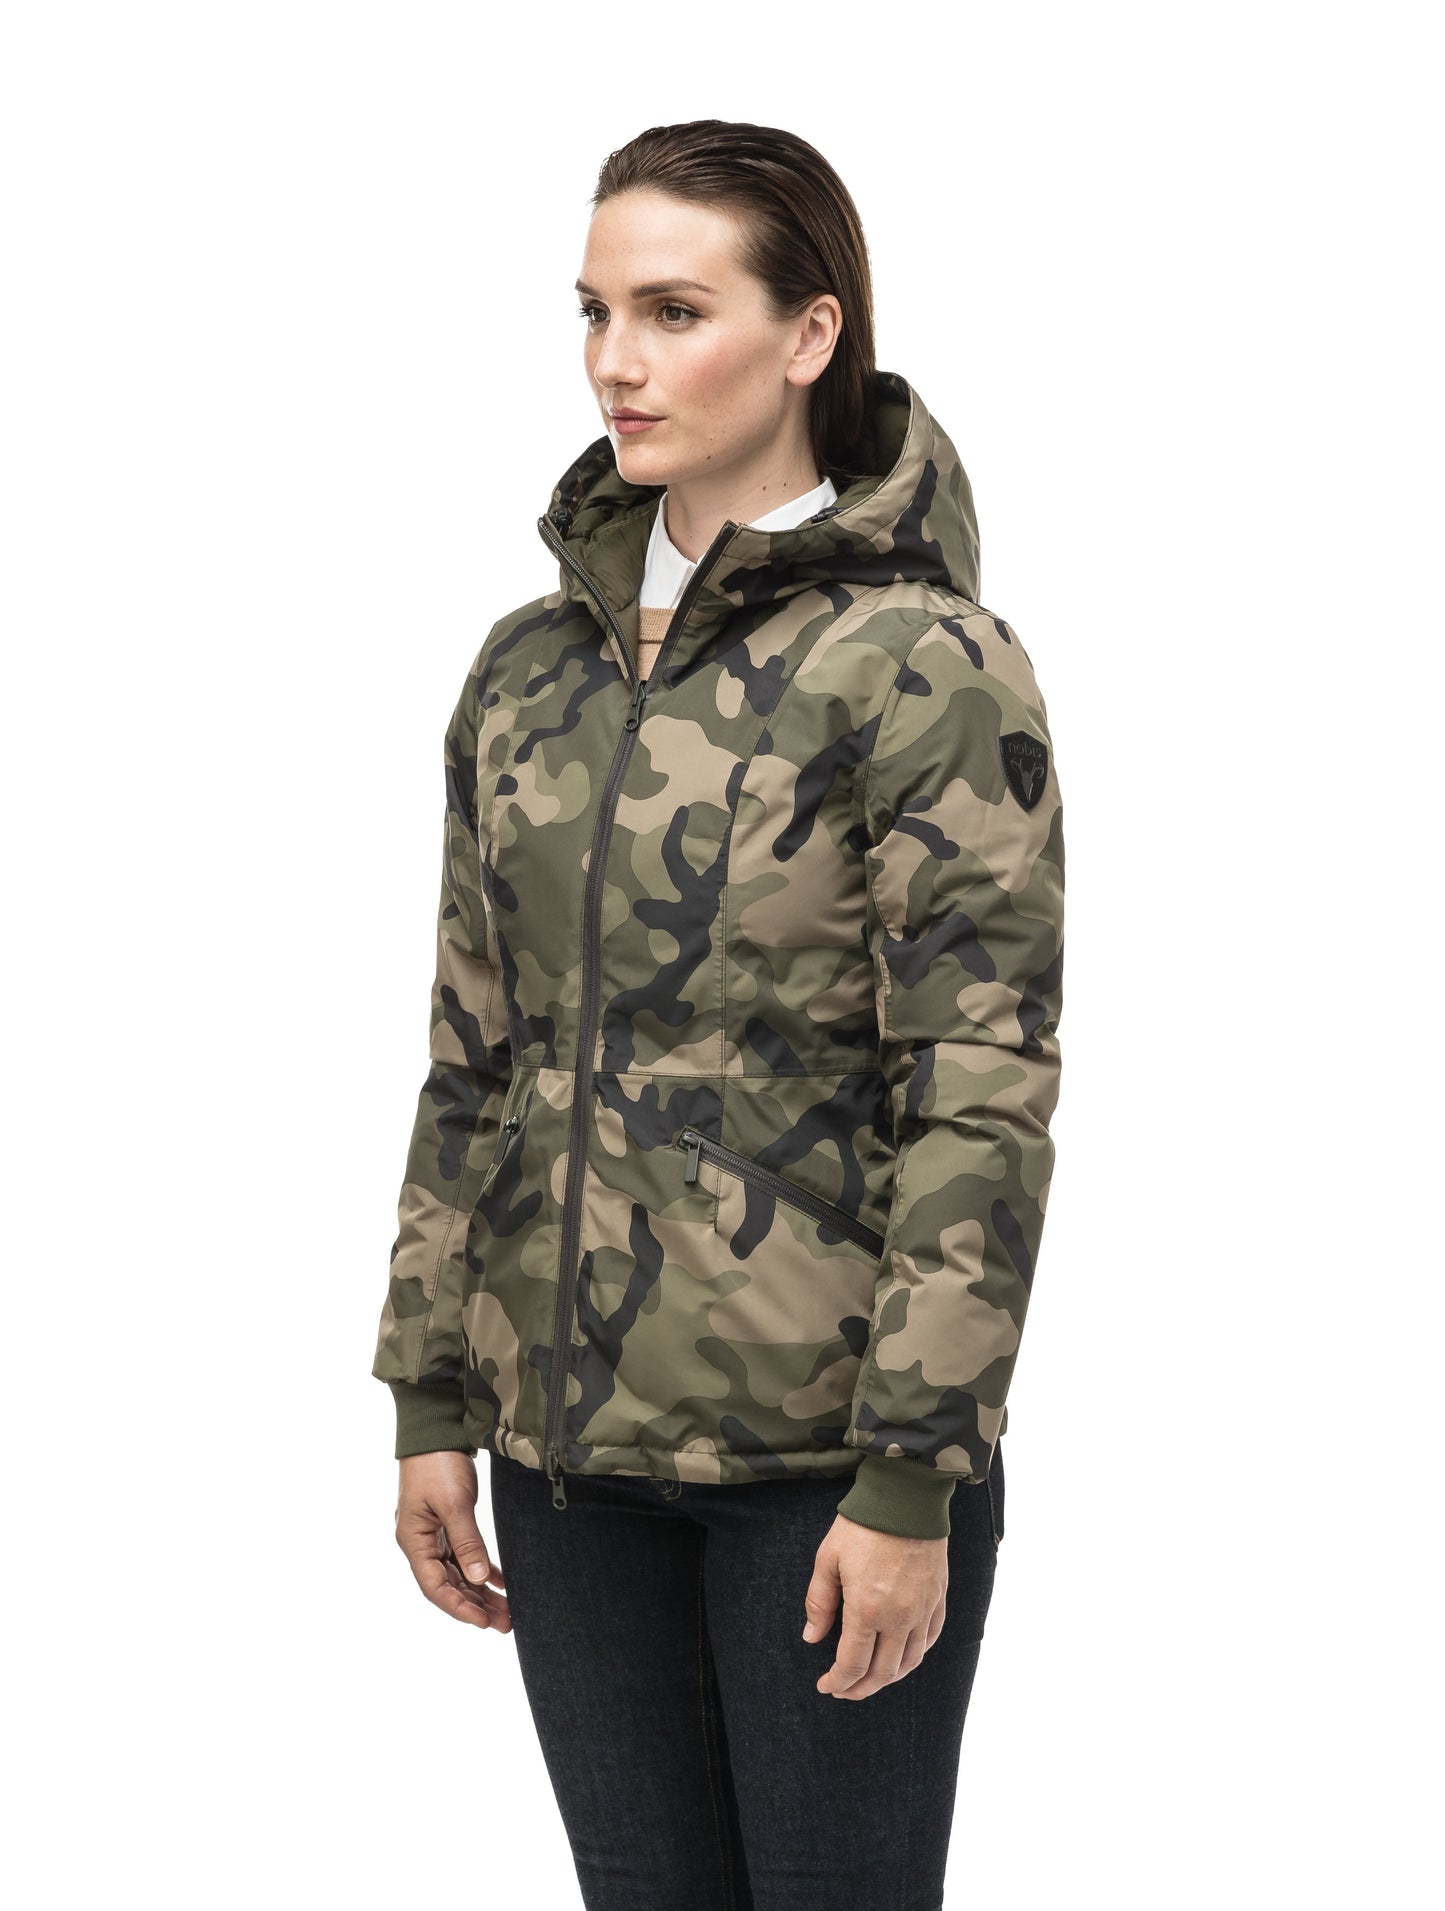 A women's two in one reversible hip length down jacket, one side is quilted and one side is solid waterproof fabric in Camo